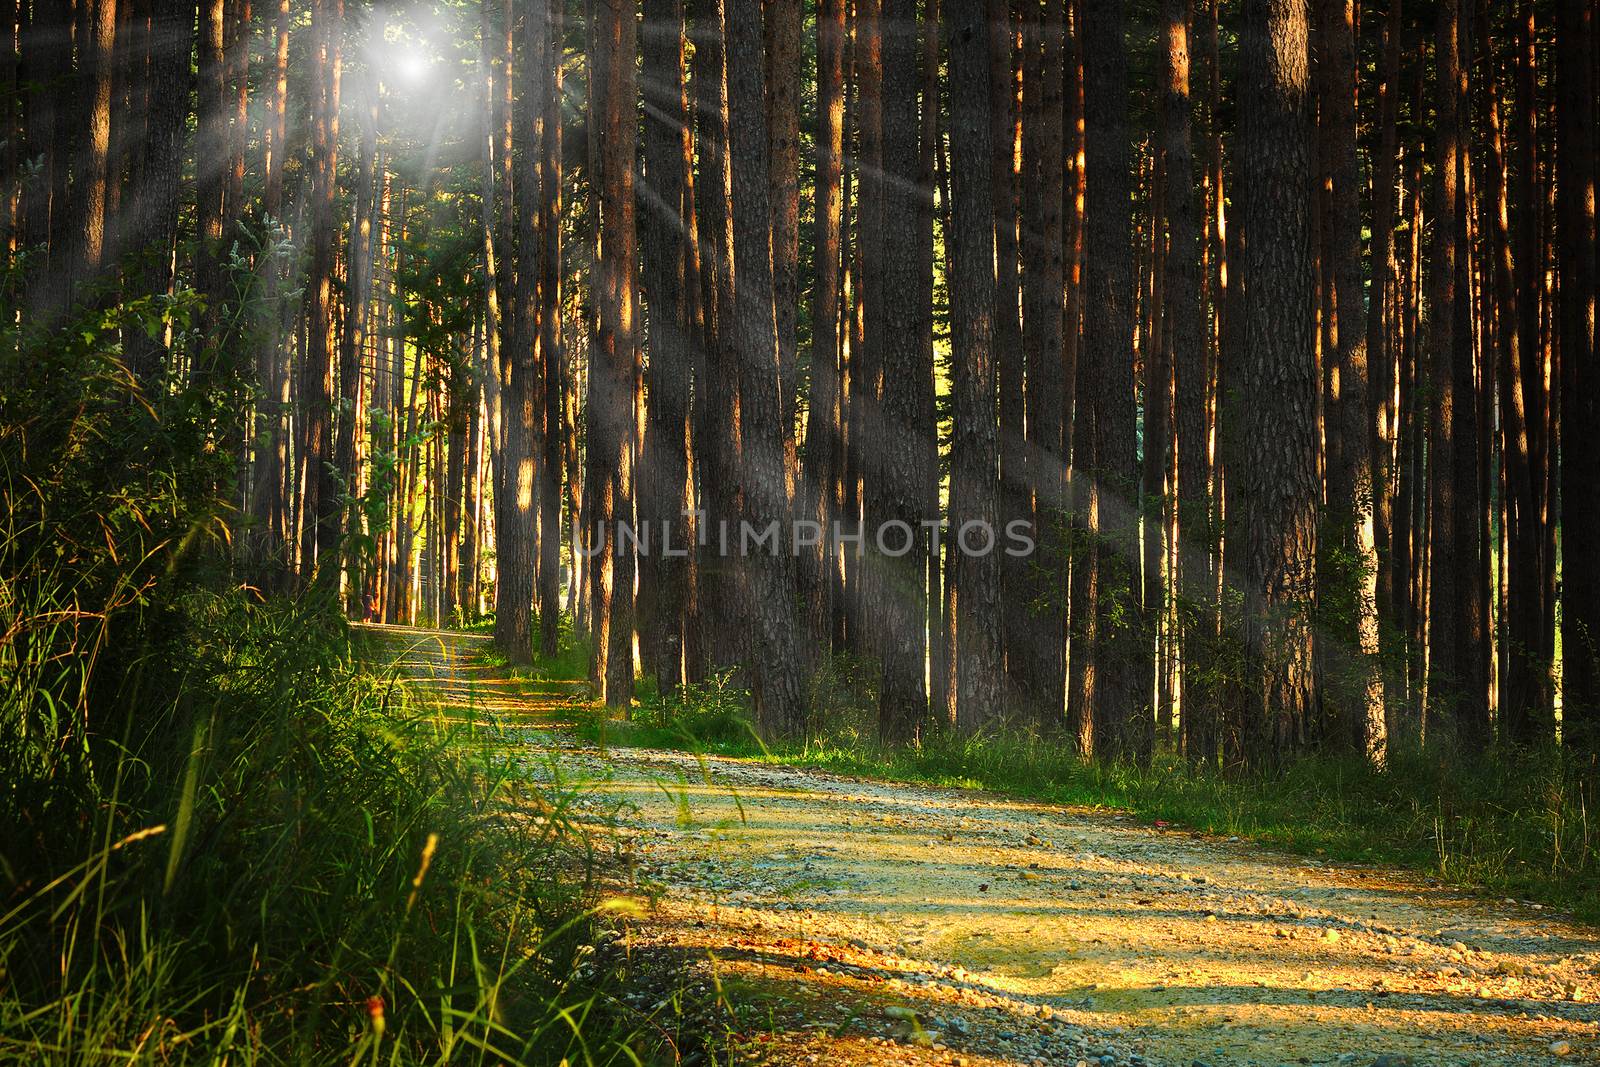 sunrays over footpath in the woods by taviphoto